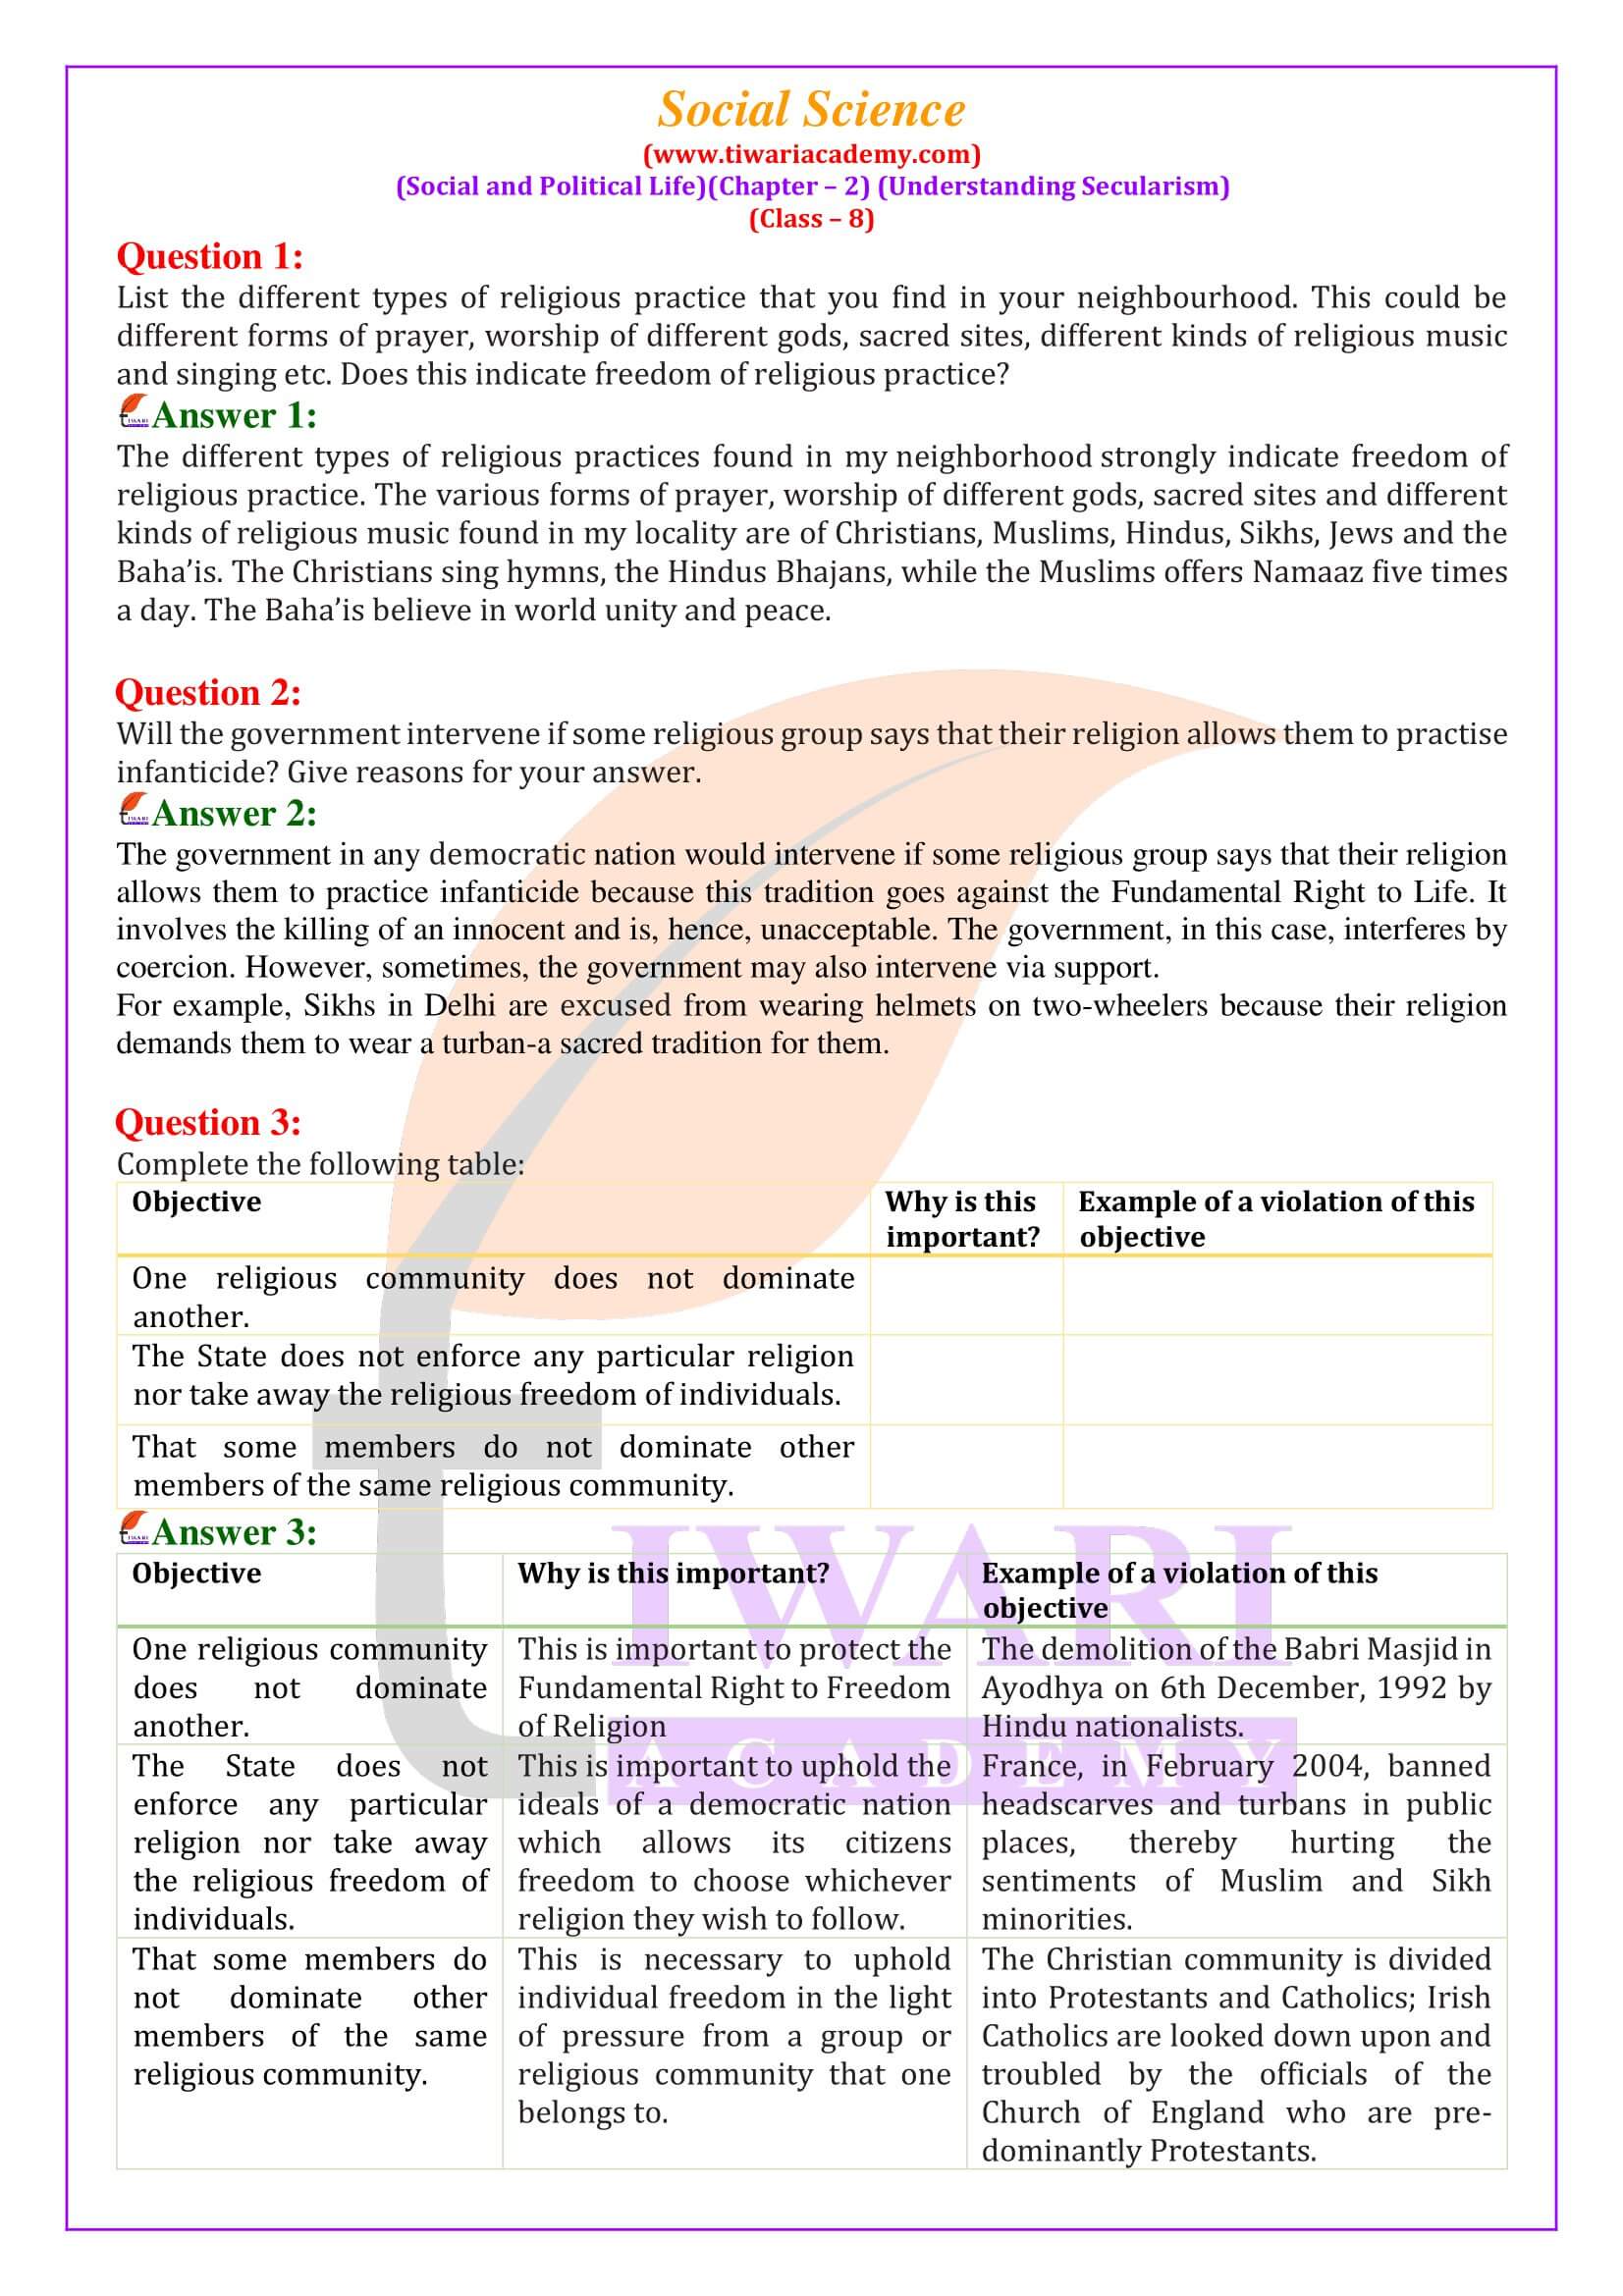 NCERT Solutions for Class 8 Social Science Civics Chapter 2 Understanding Secularism